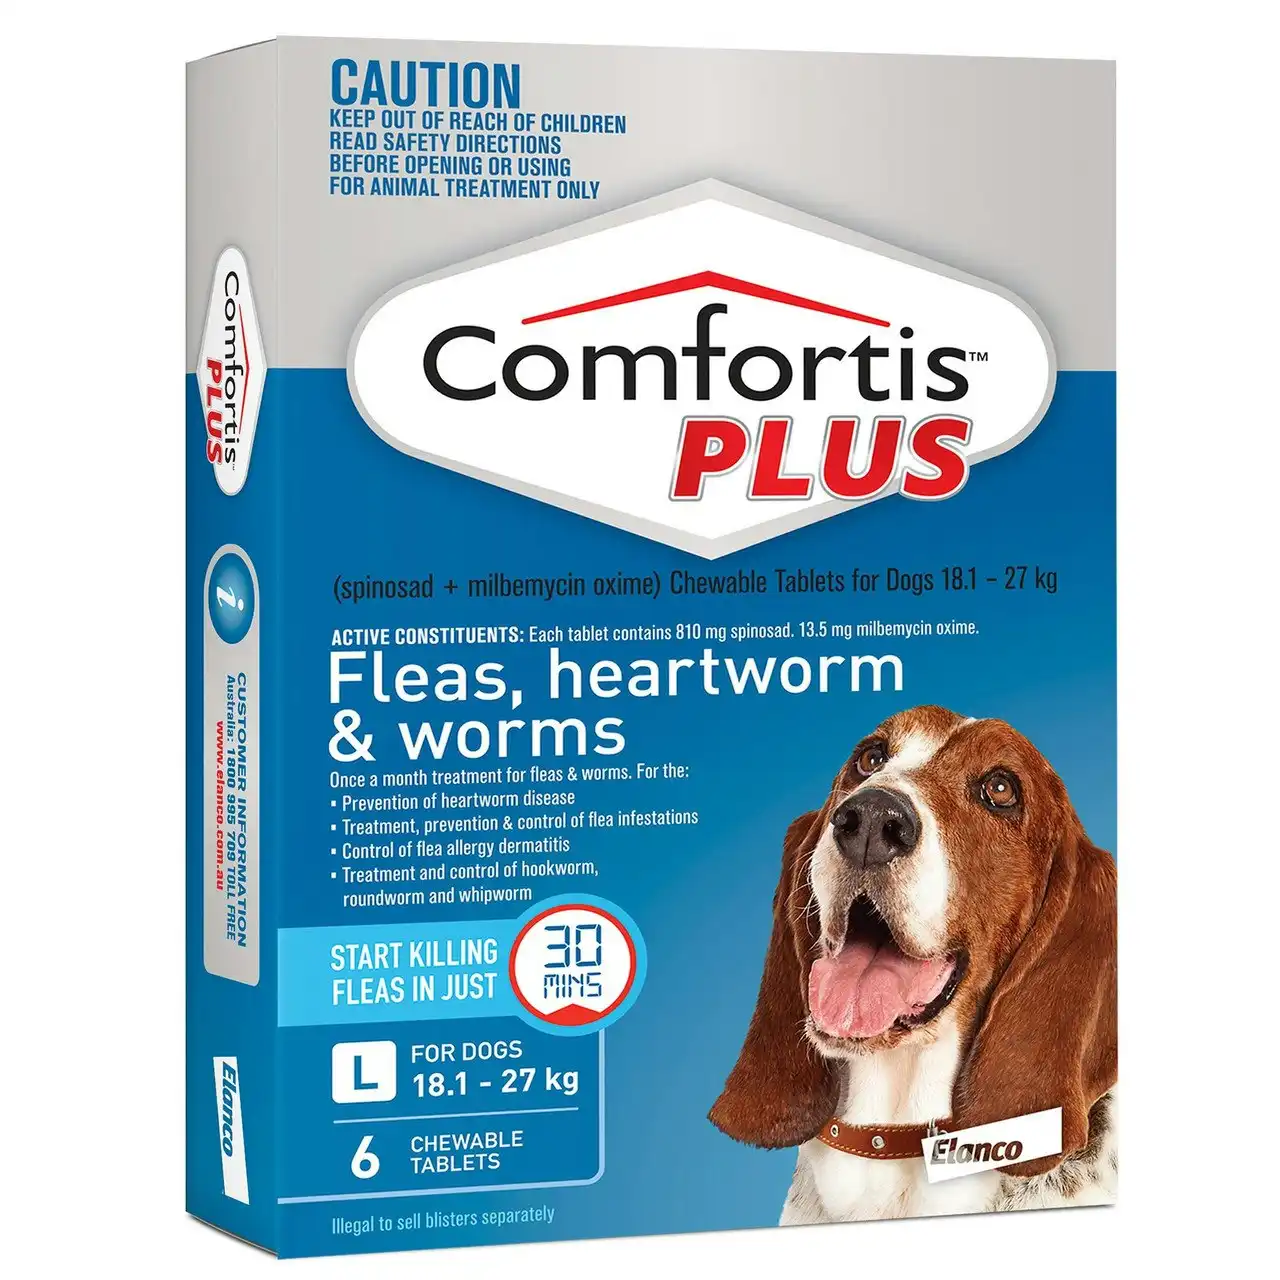 Comfortis PLUS Fleas, Heartworm & Worms for Dogs 18.1 - 27kg - 6 Pack